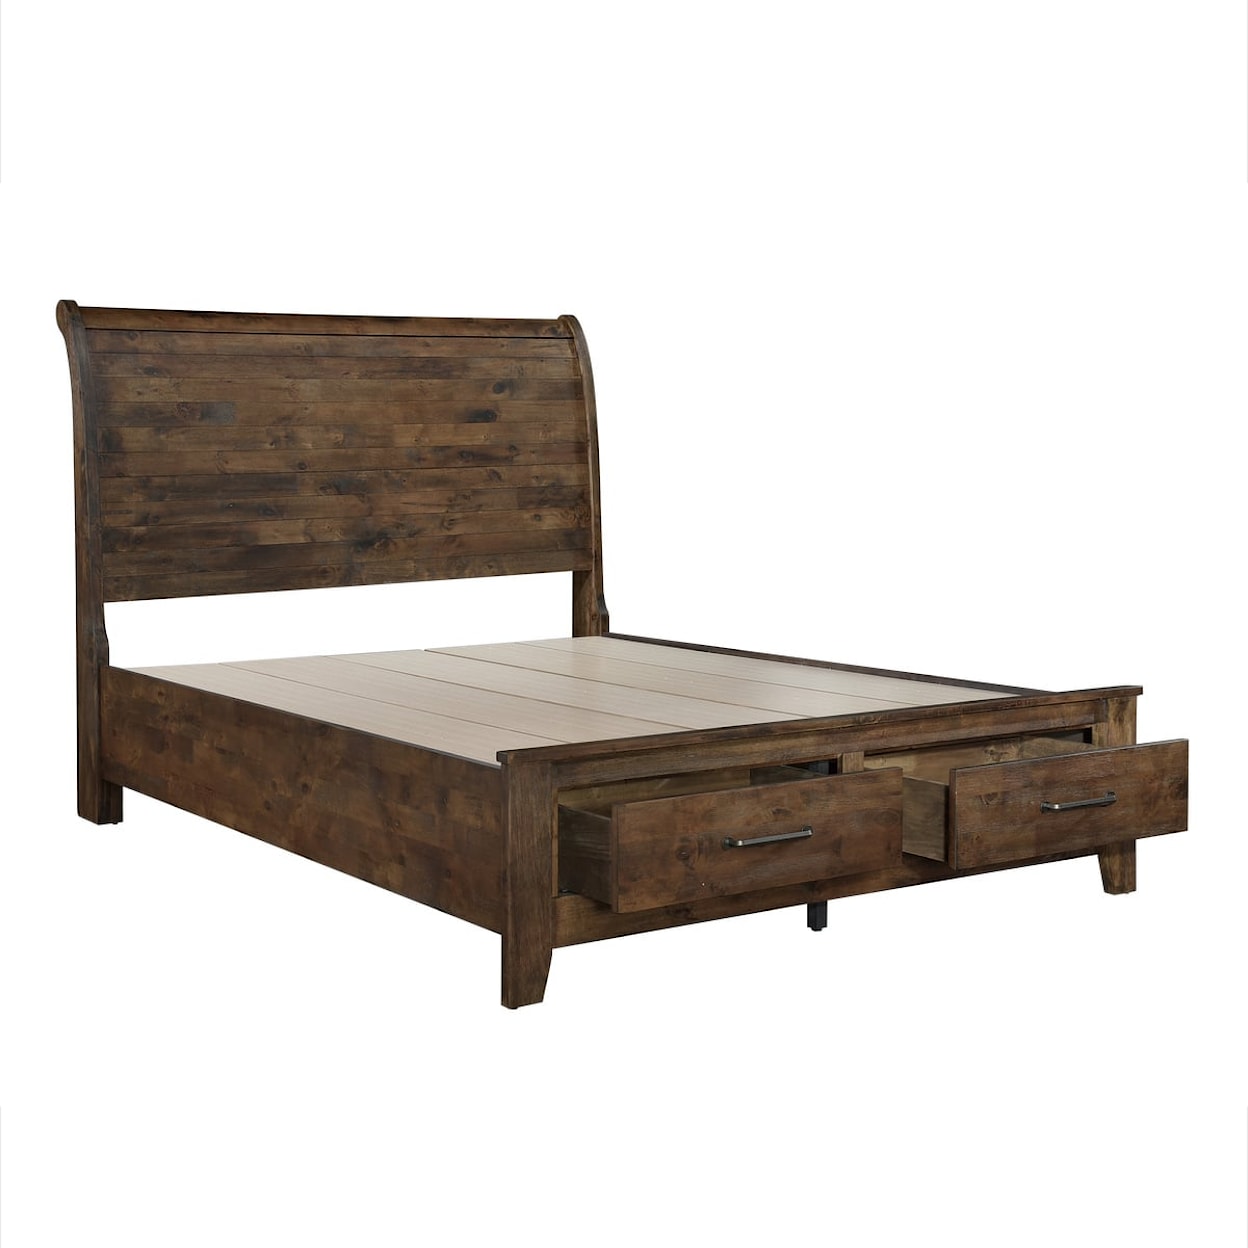 Homelegance Furniture Jerrick Queen Sleigh  Bed with FB Storage